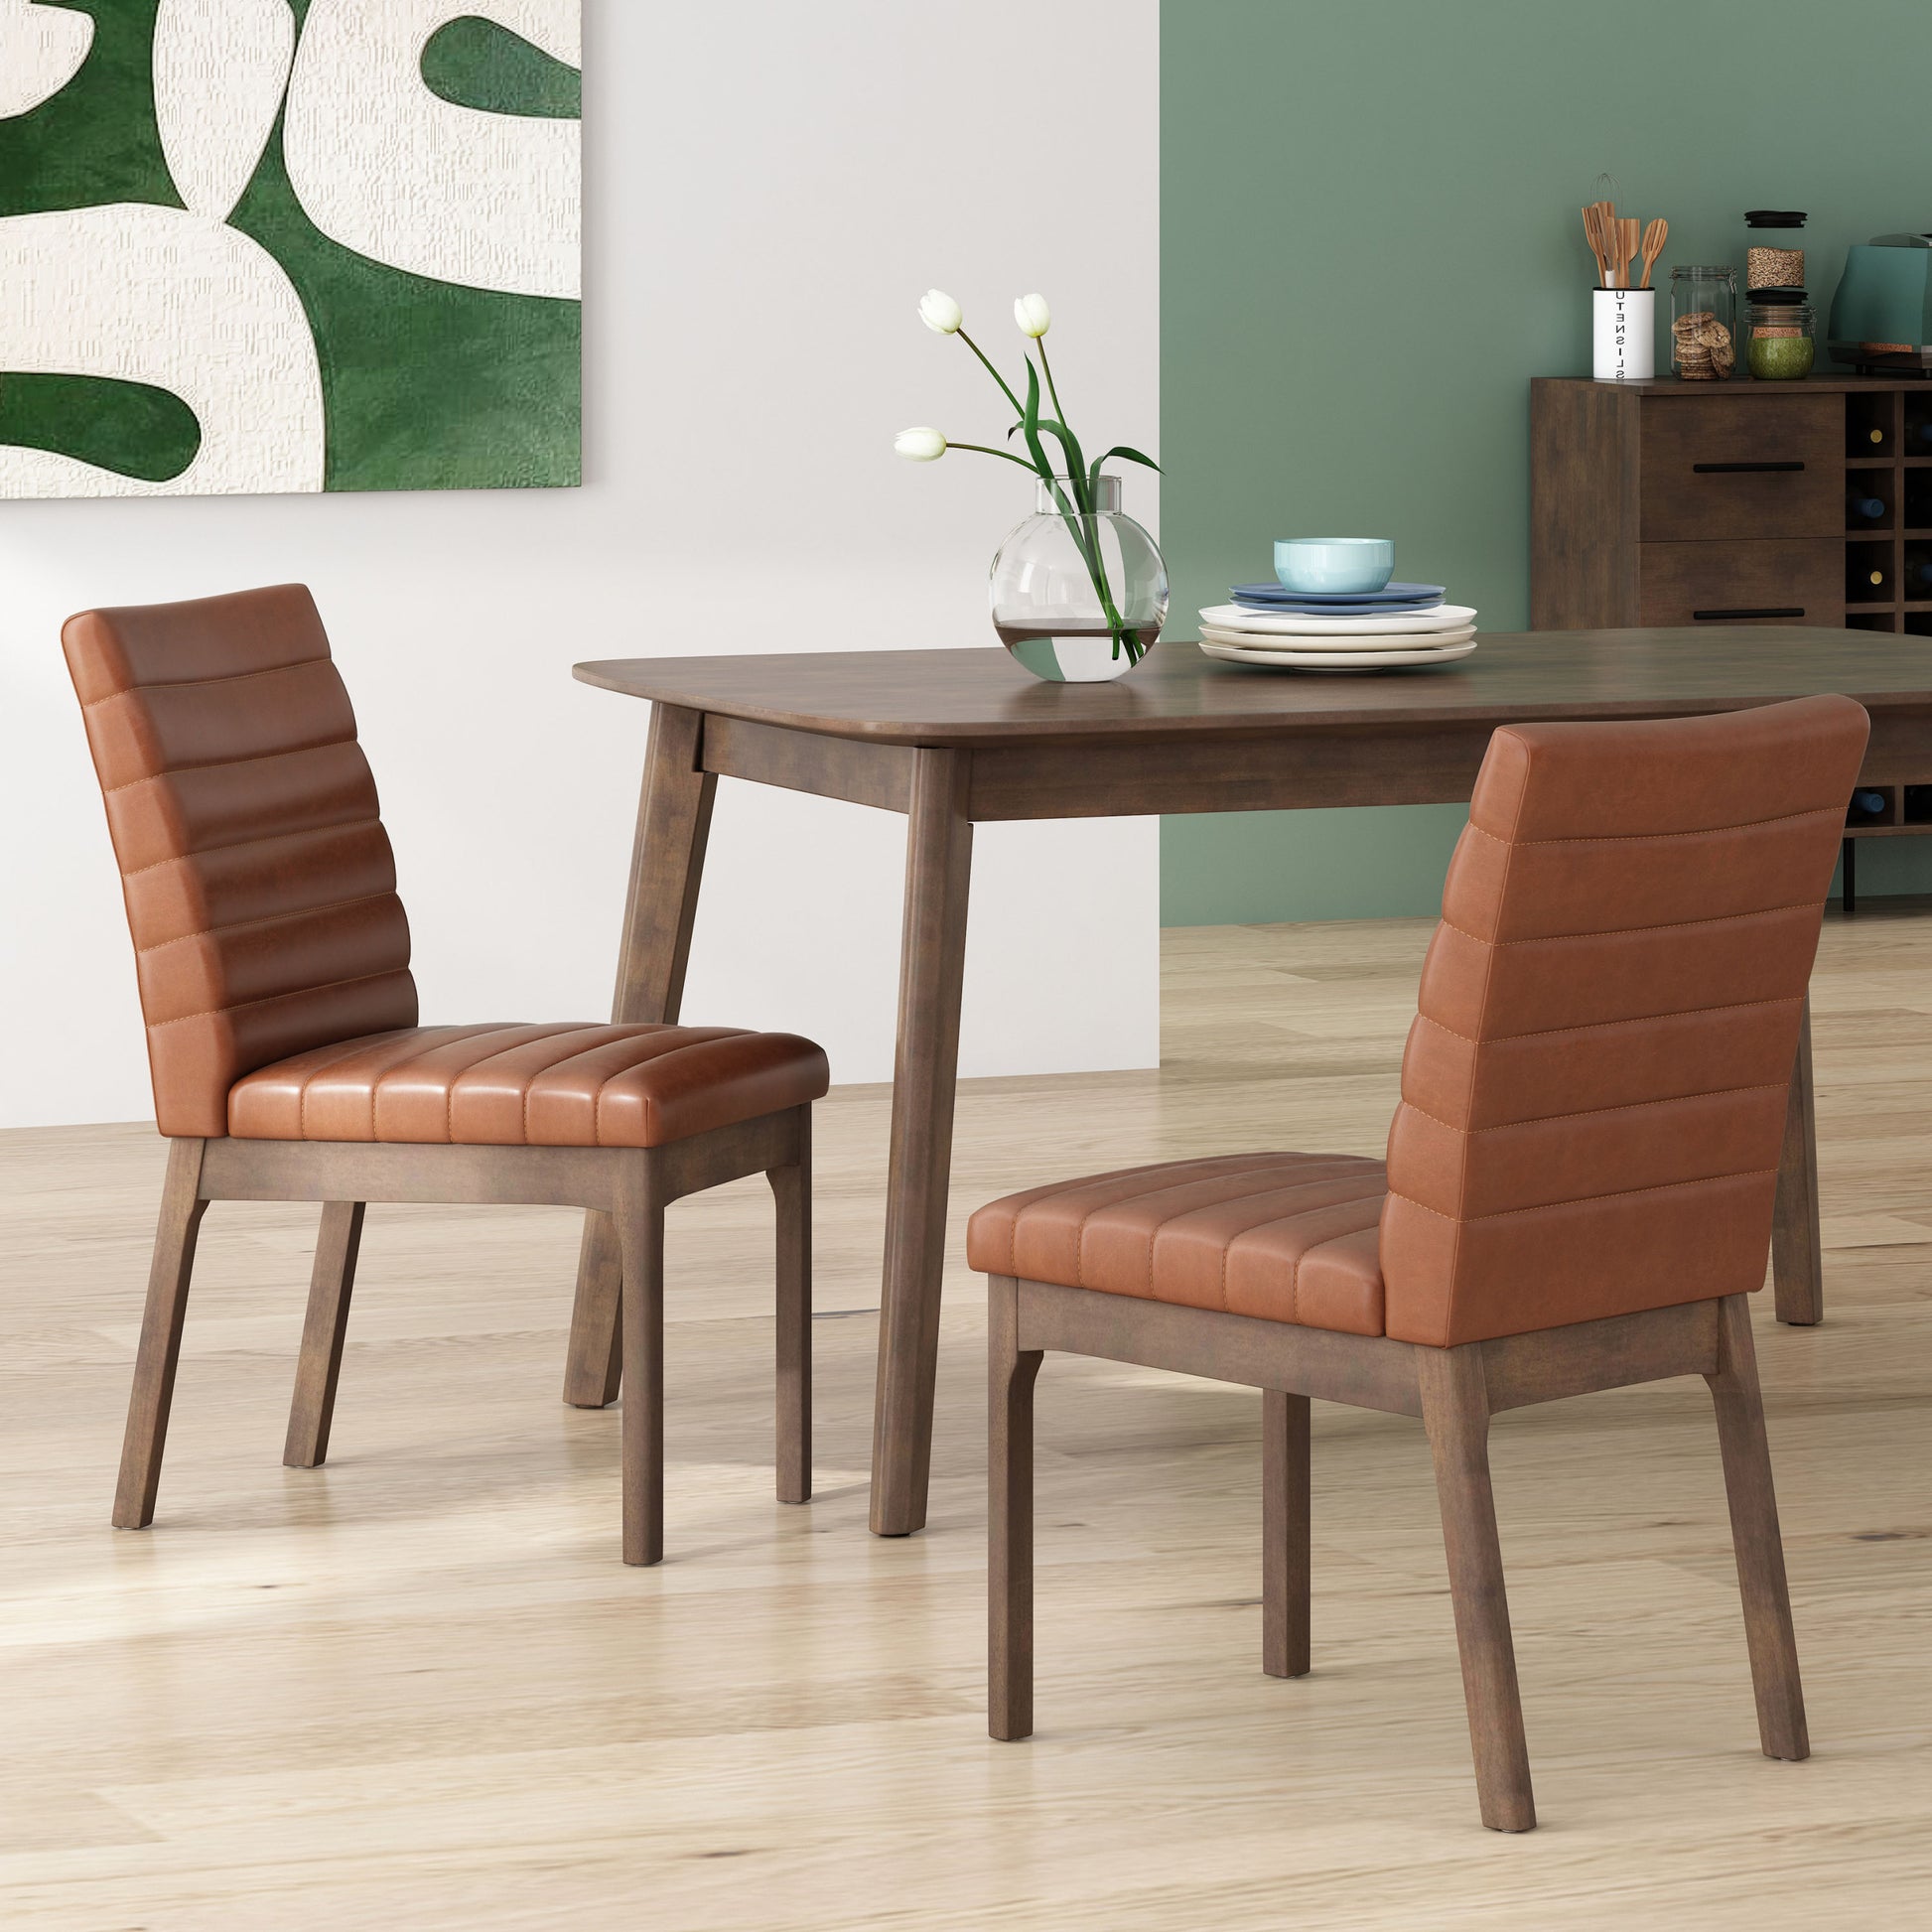 Dining Chair - Light Brown Wood